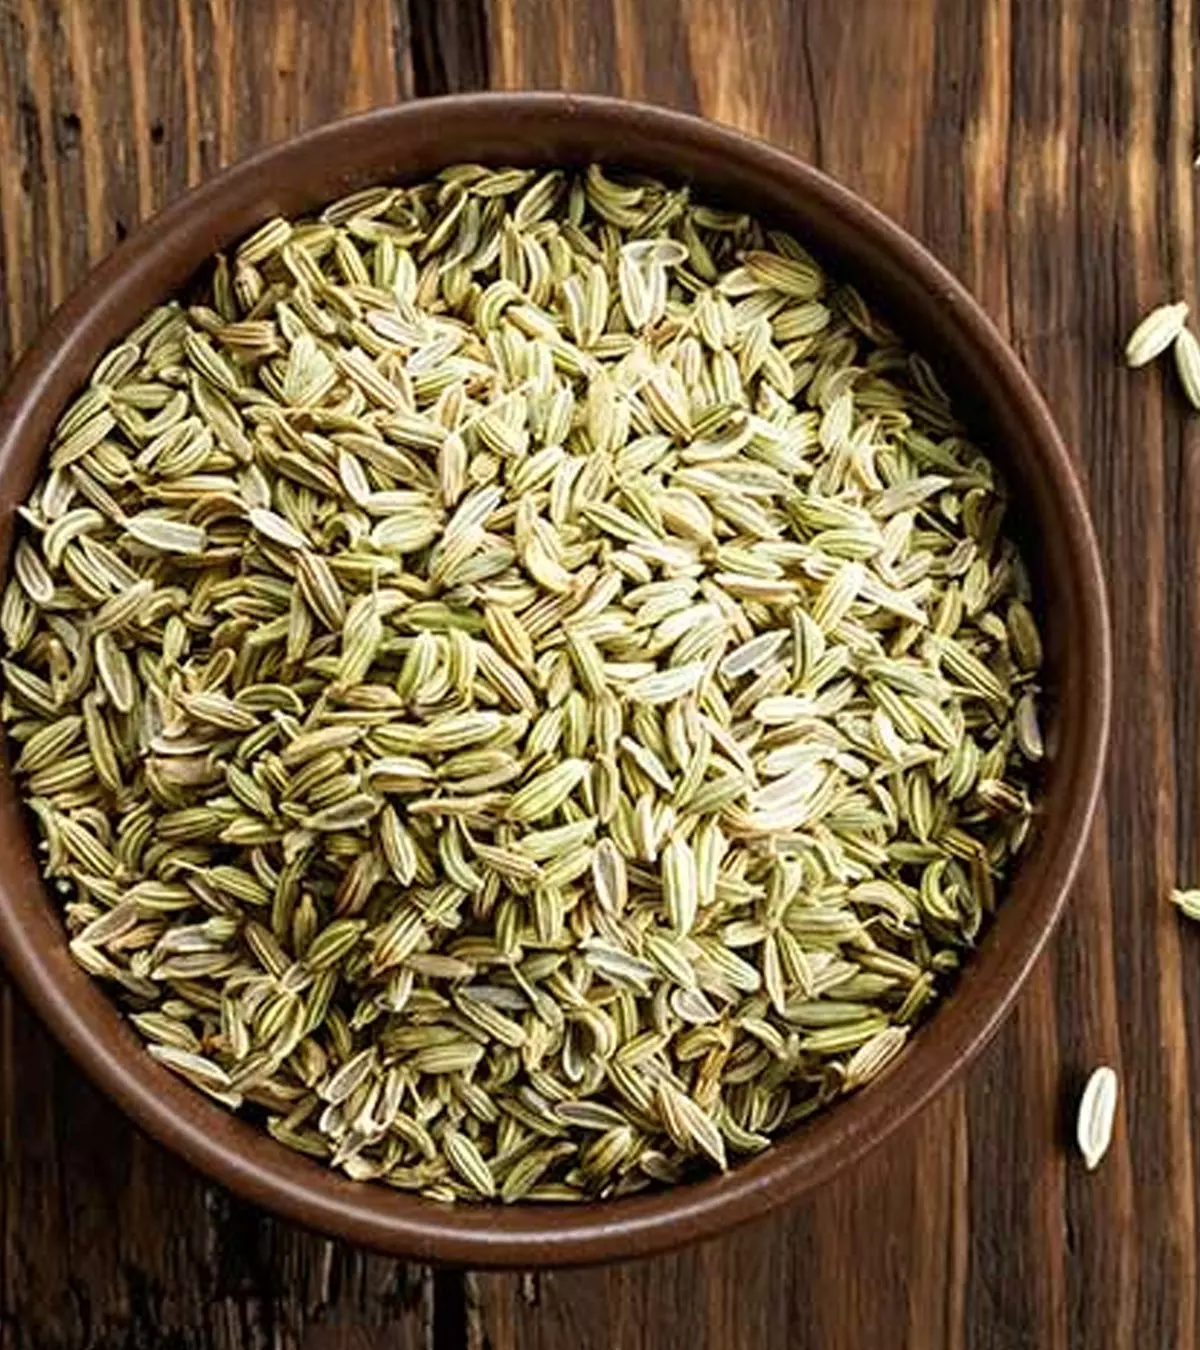 Fennel For Increasing Milk Supply: Does It Really Work_image